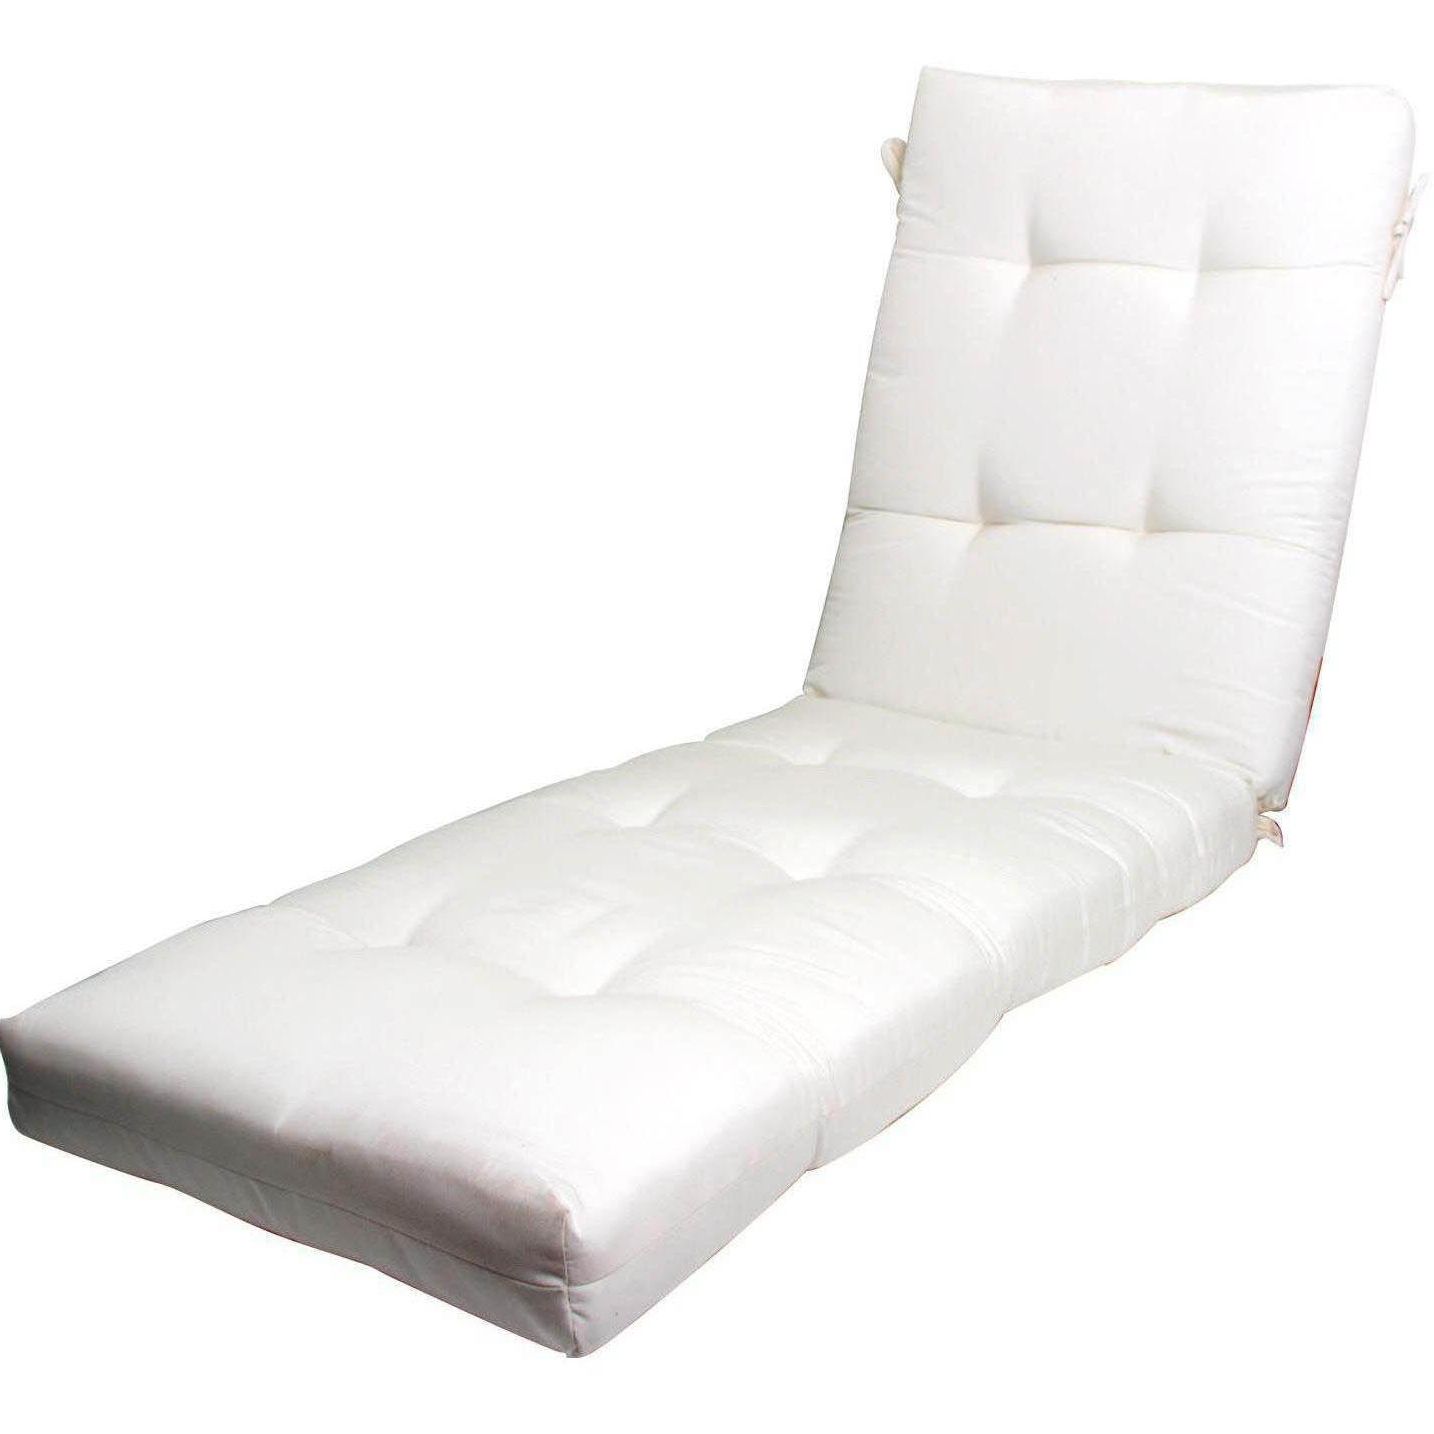 Sunbrella Canvas Natural Extra Long Outdoor Replacement Chaise With Fashionable Chaise Lounge Pads (View 1 of 15)